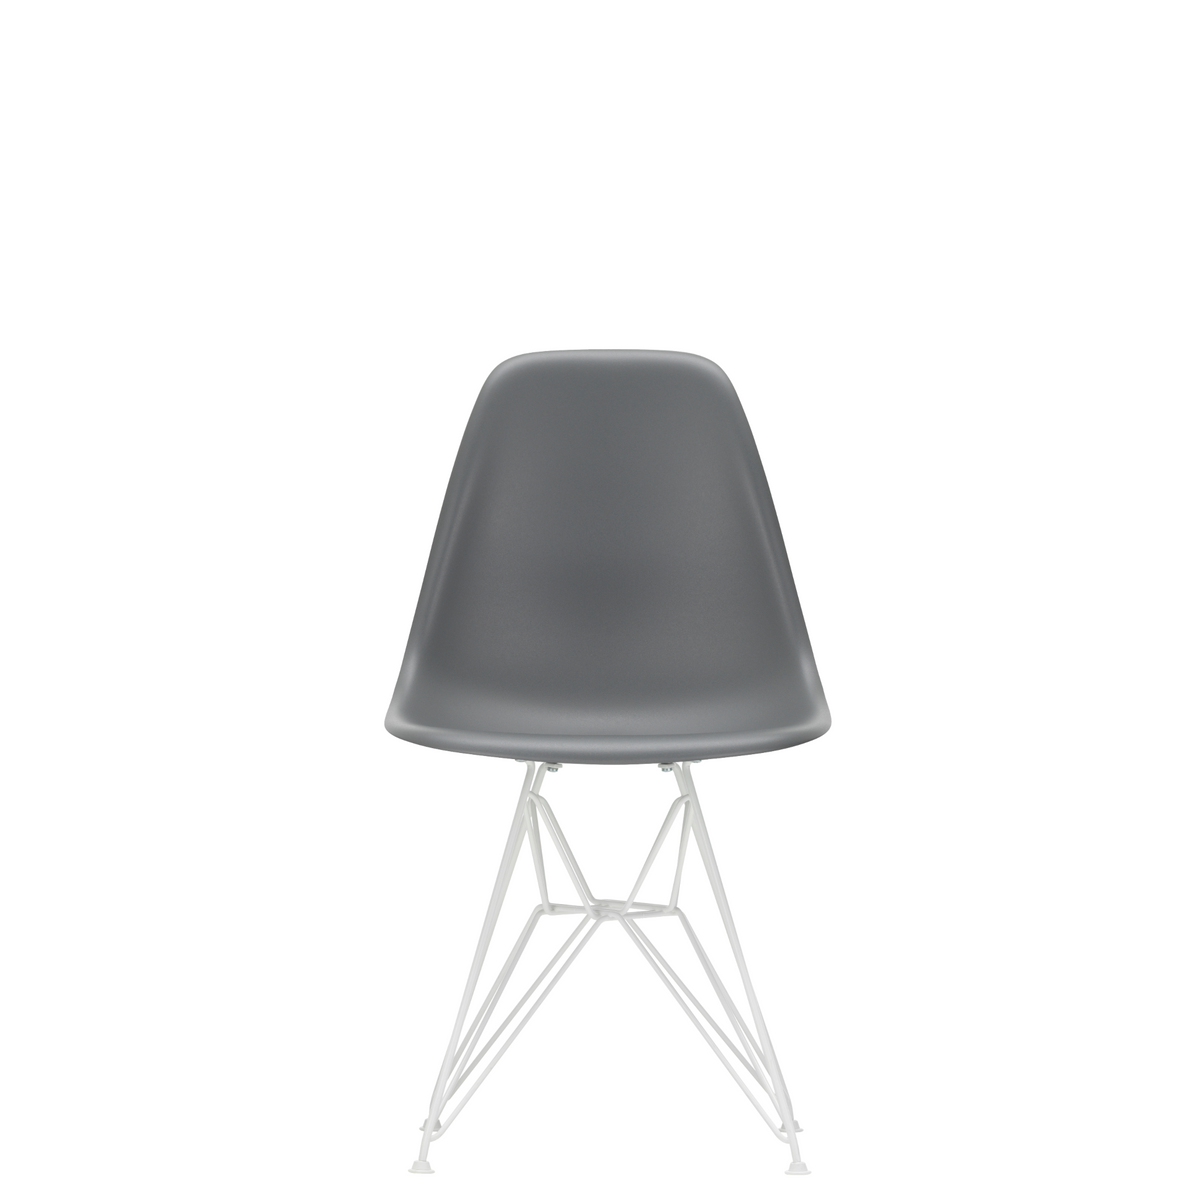 Vitra Eames Plastic Side Chair DSR Powder Coated for Outdoor Use. Granite Grey Shell, White Powdercoated Base